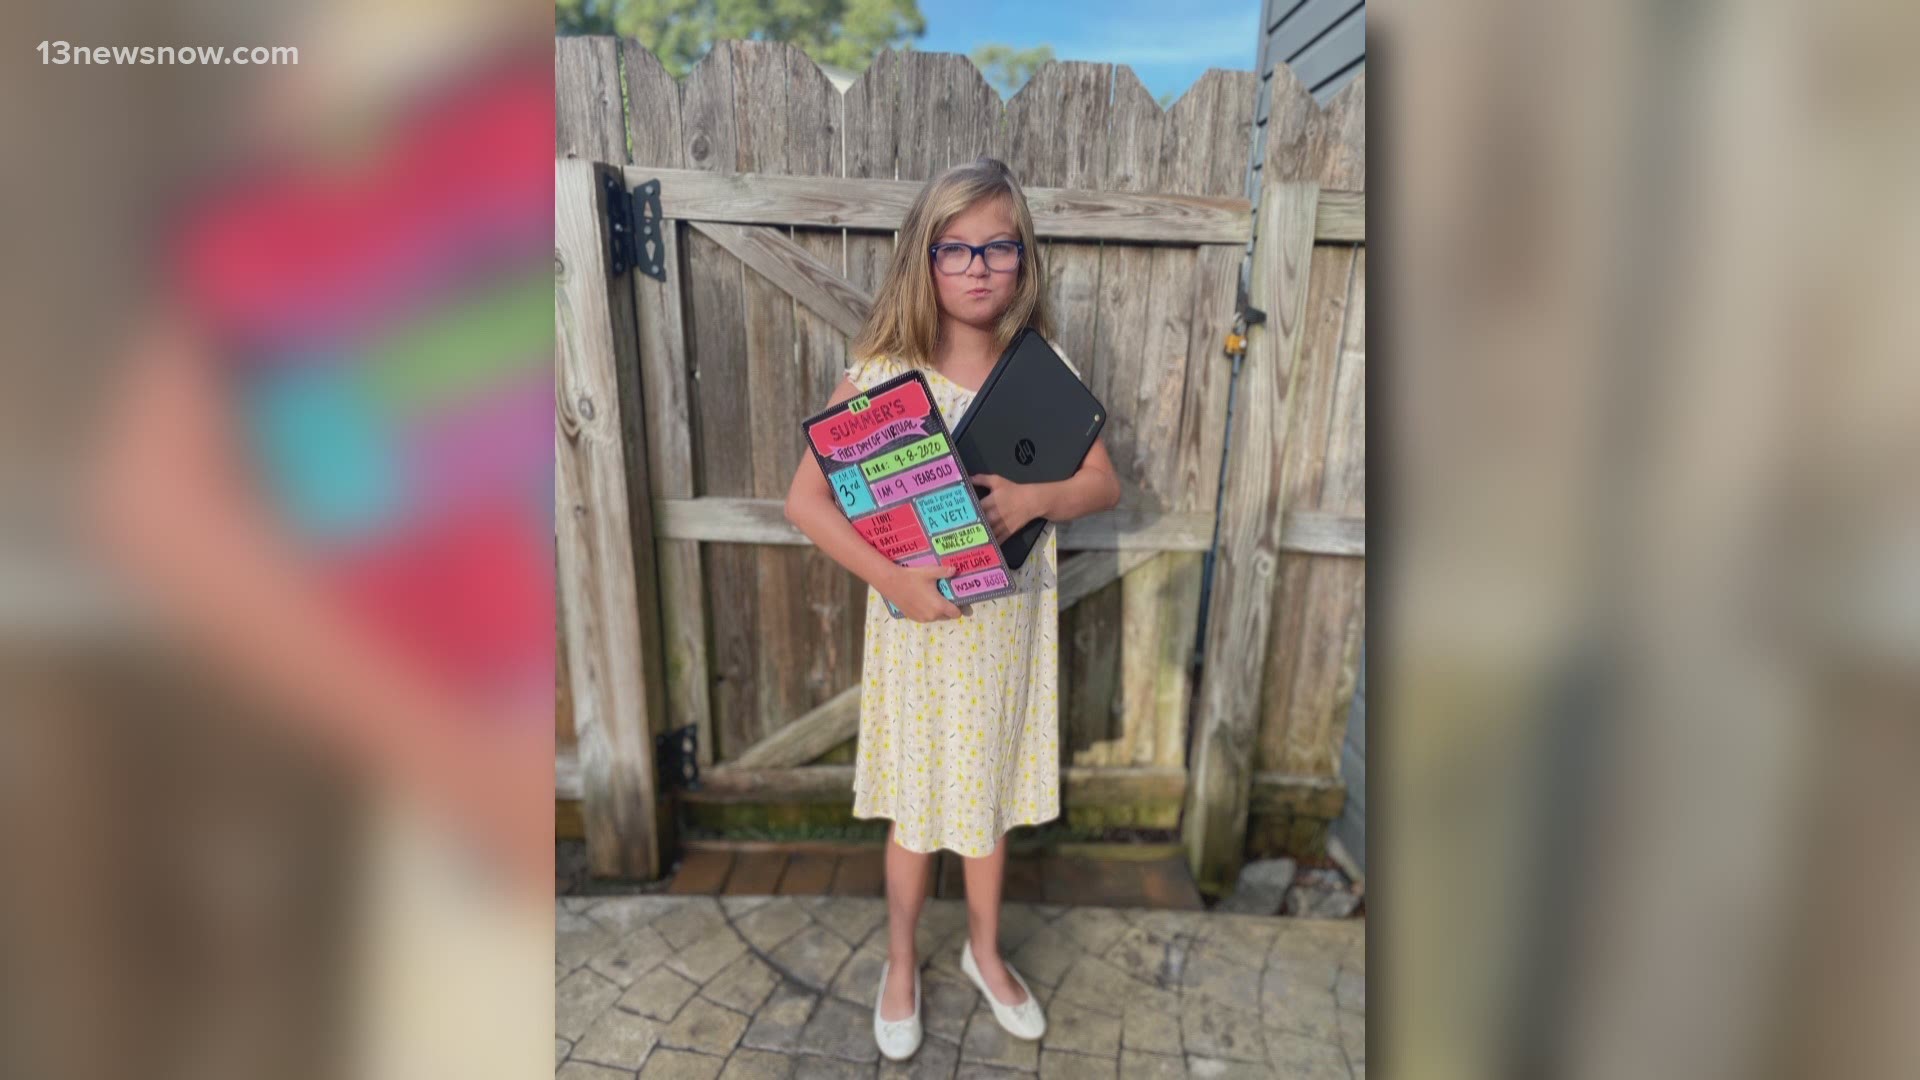 Despite the struggles, the first day of school was still an exciting new step for many students, and what better way to celebrate than with some back-to-school pics?